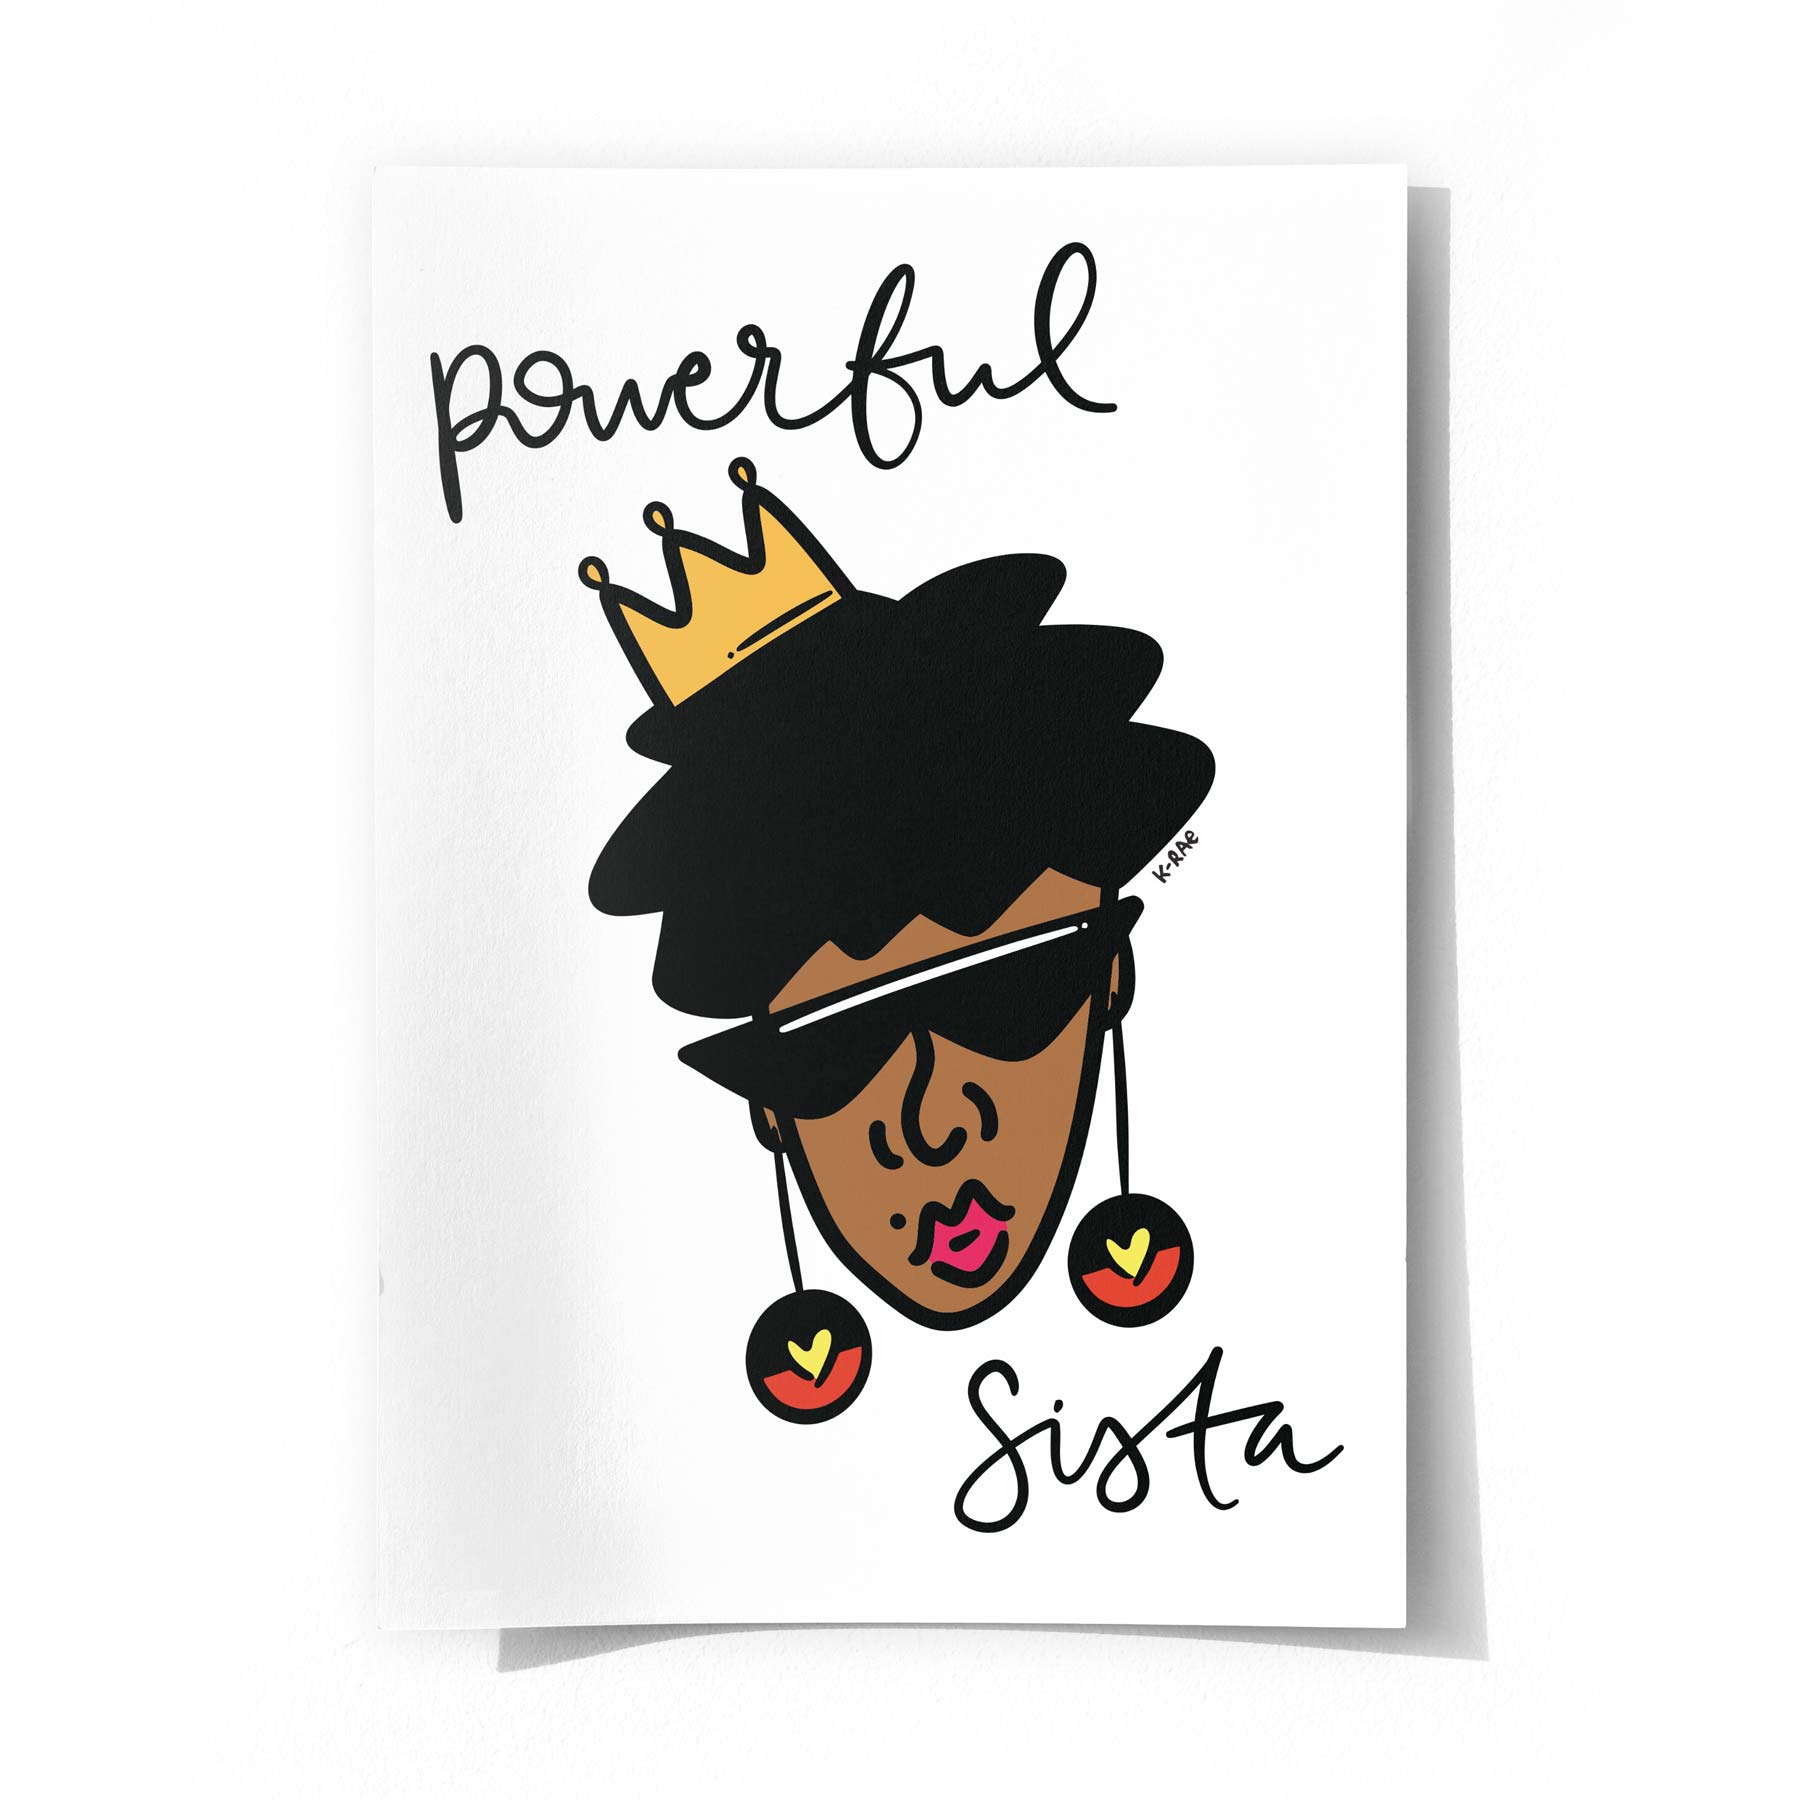 Wall Poster, Powerful Sista